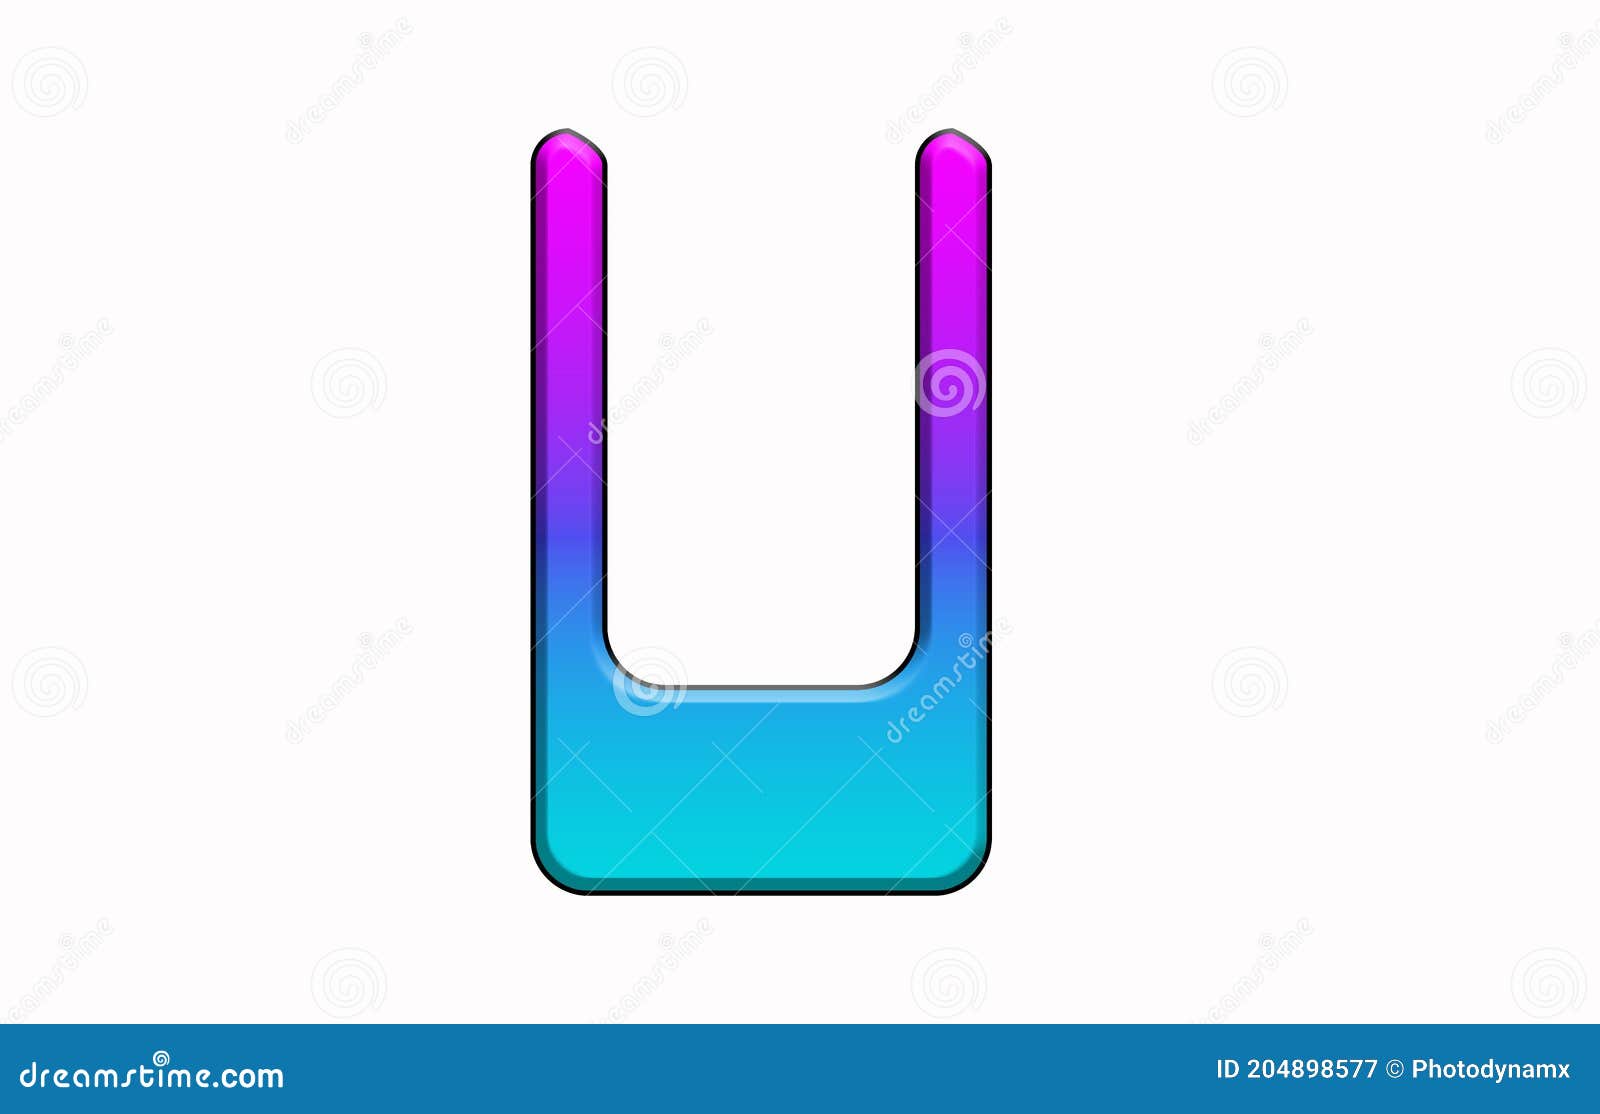 futuristic geminis gradient spaceship space galaxy alphabet letters calligraphy letter word text fonts font unique